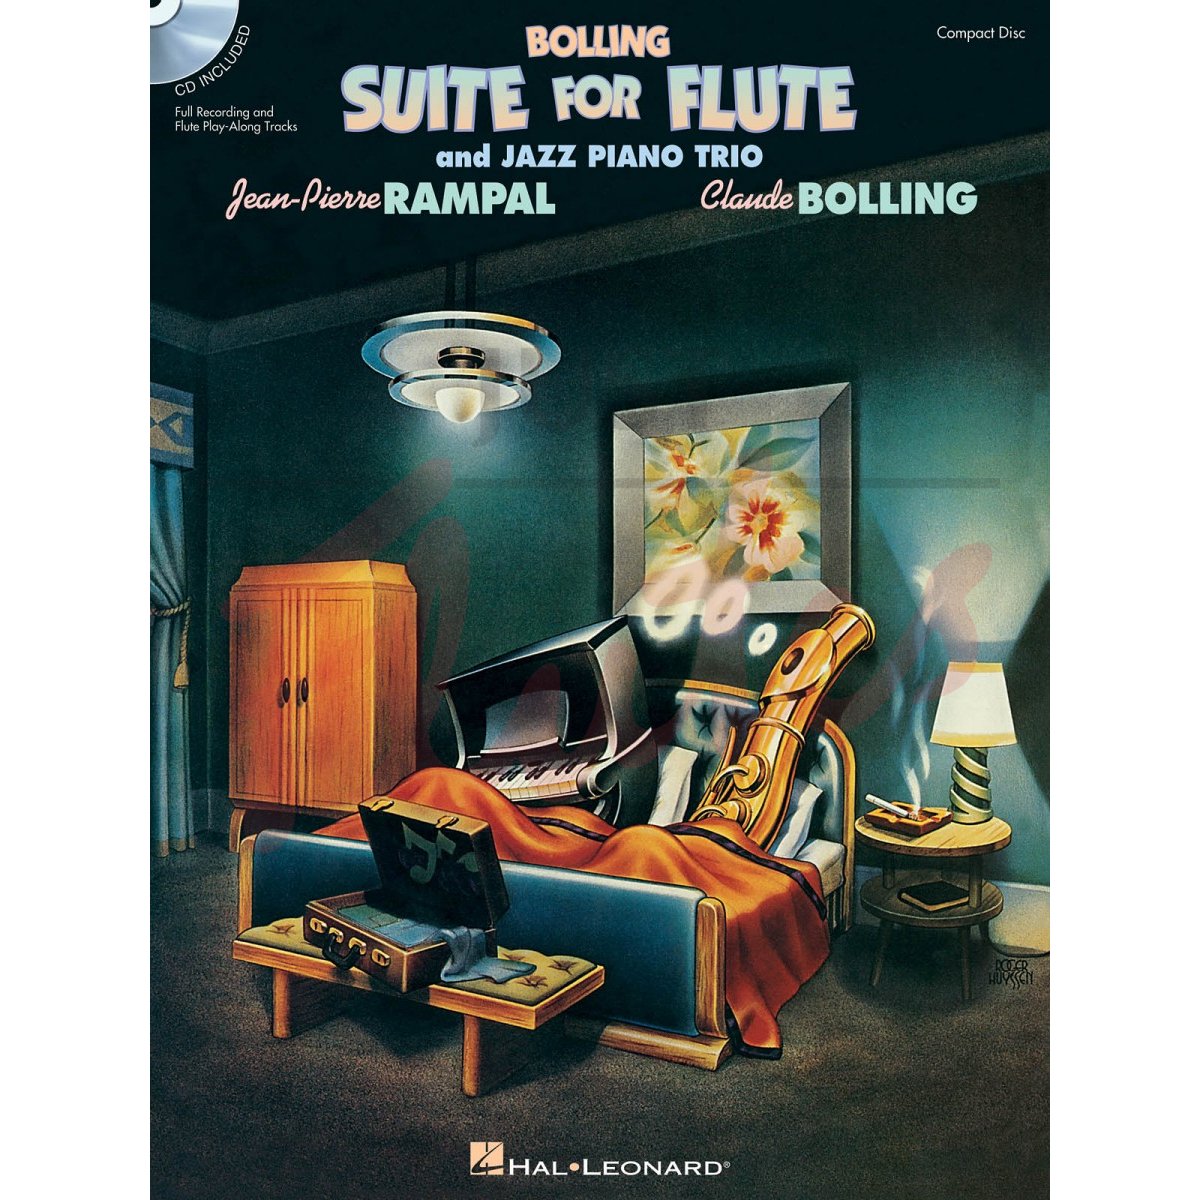 Suite for Flute and Jazz Piano Trio